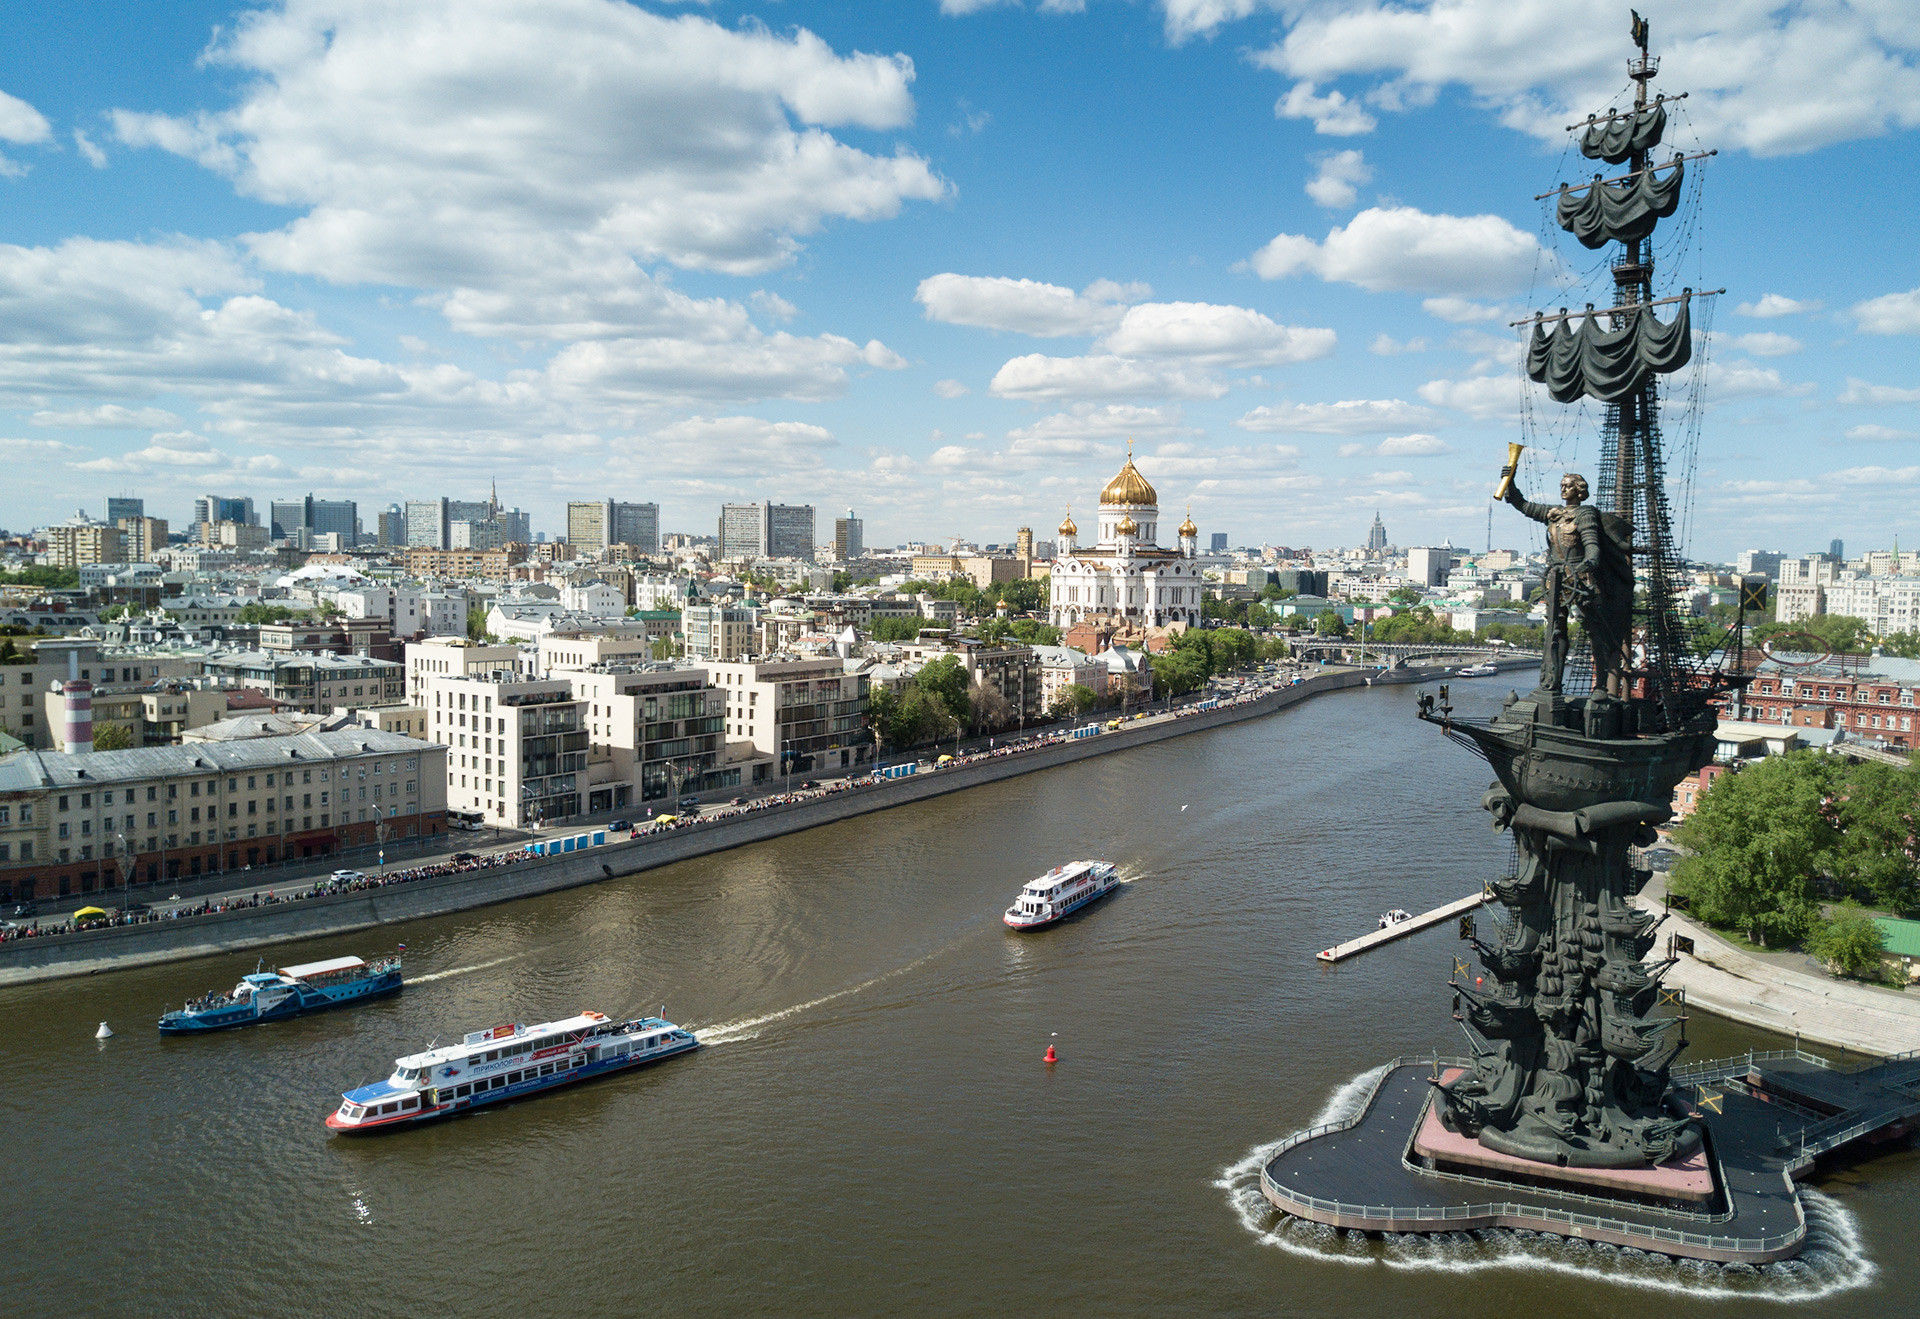 Tsereteli's most famous project is the 98-meter-high statue of Peter the Great on the banks of the Moscow River, about a mile from the Kremlin